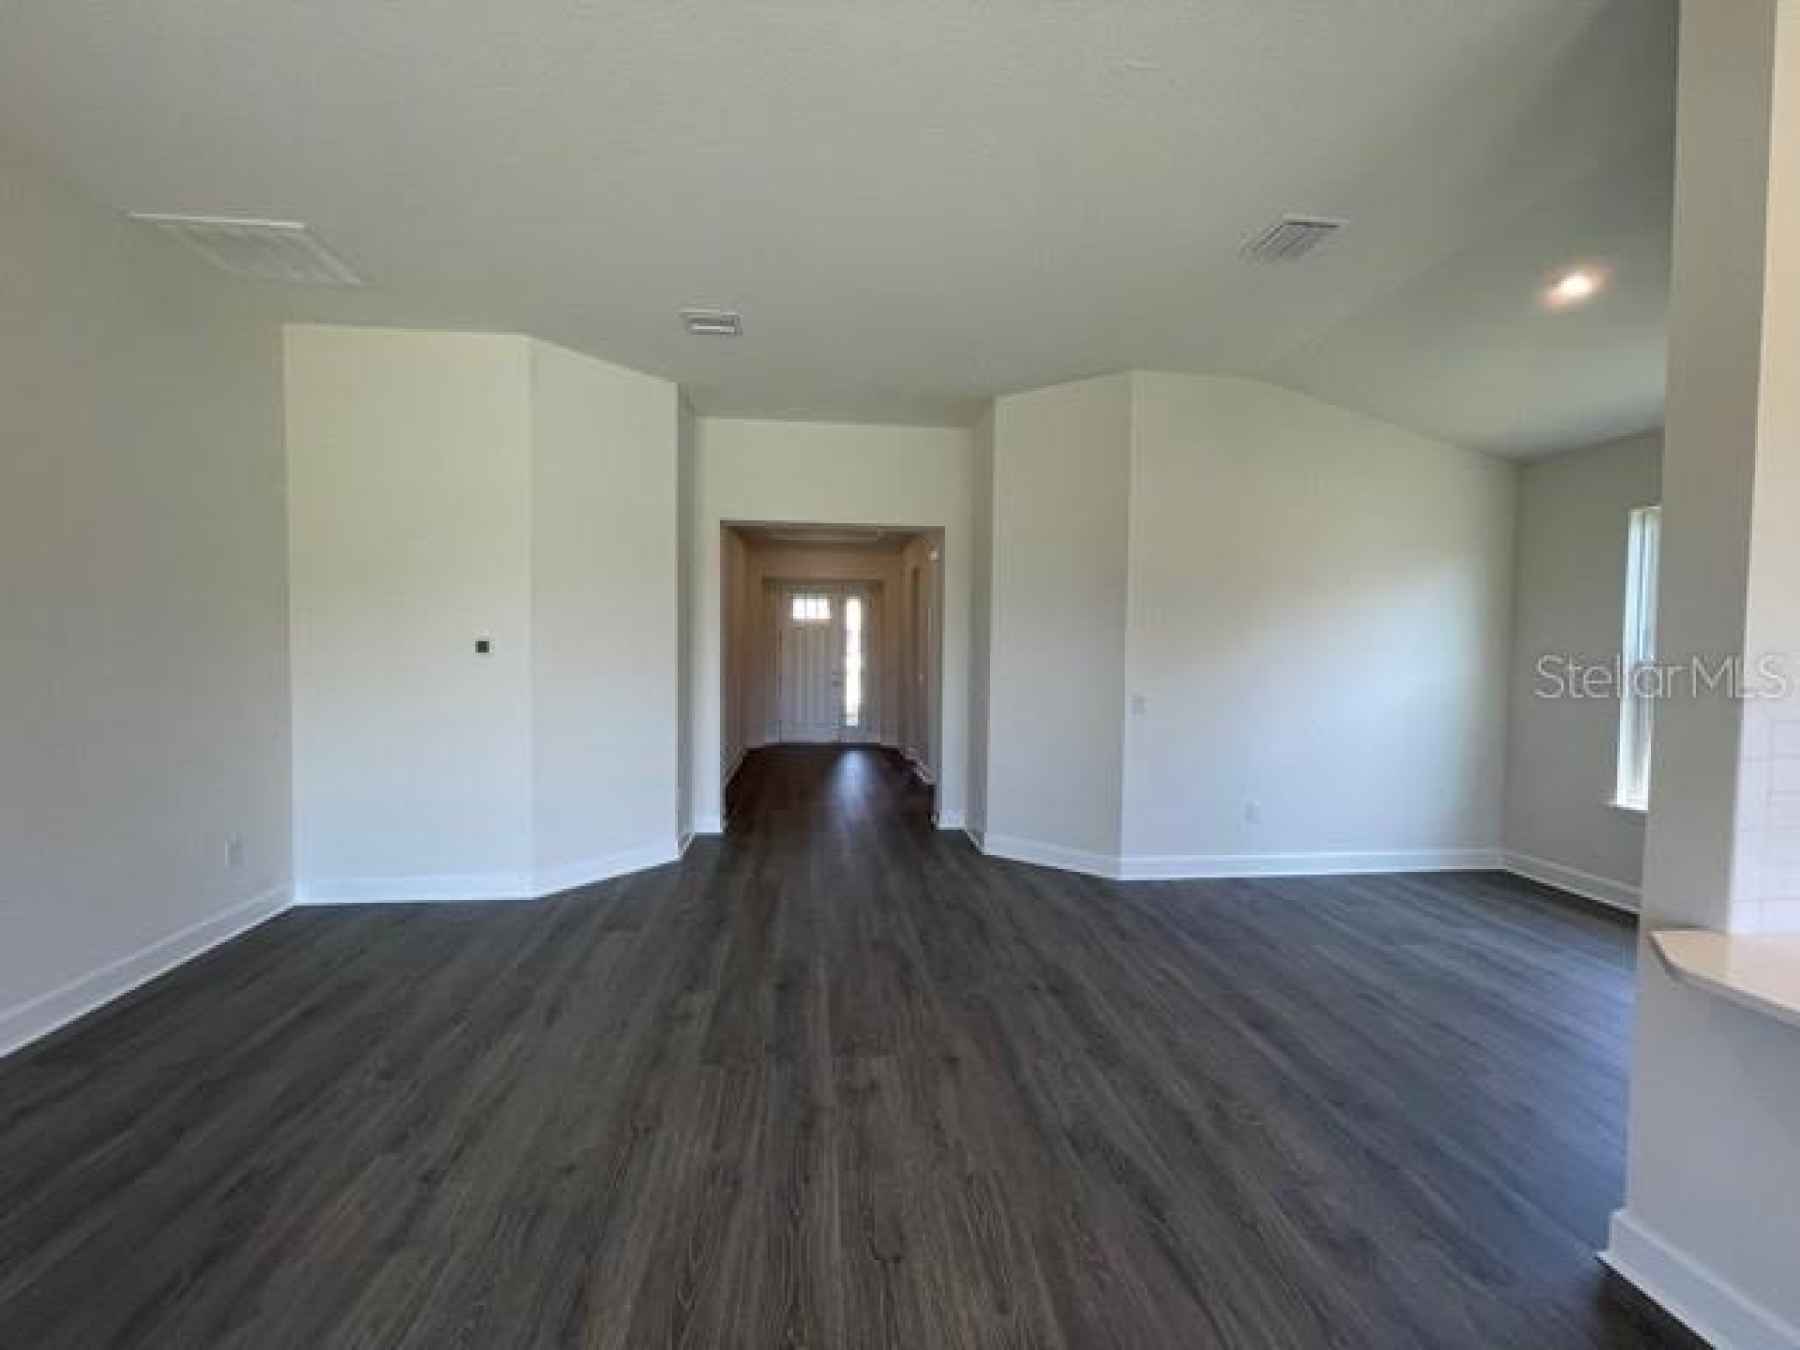 Beautiful views from family room to the inviting entry!